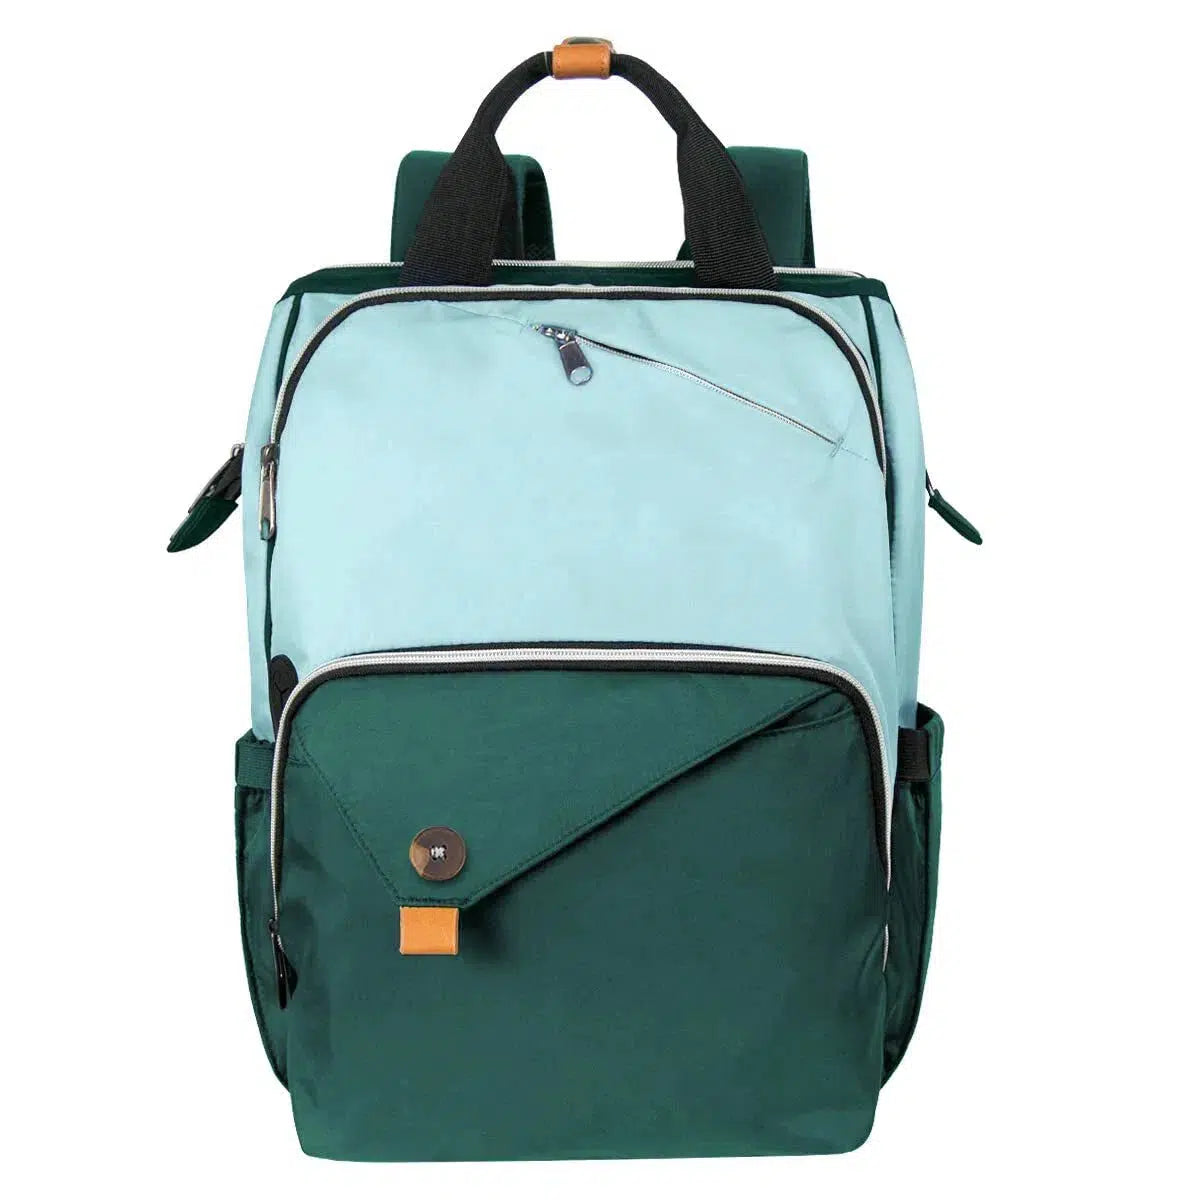 Pandapouch Diaper Bag Backpack Green